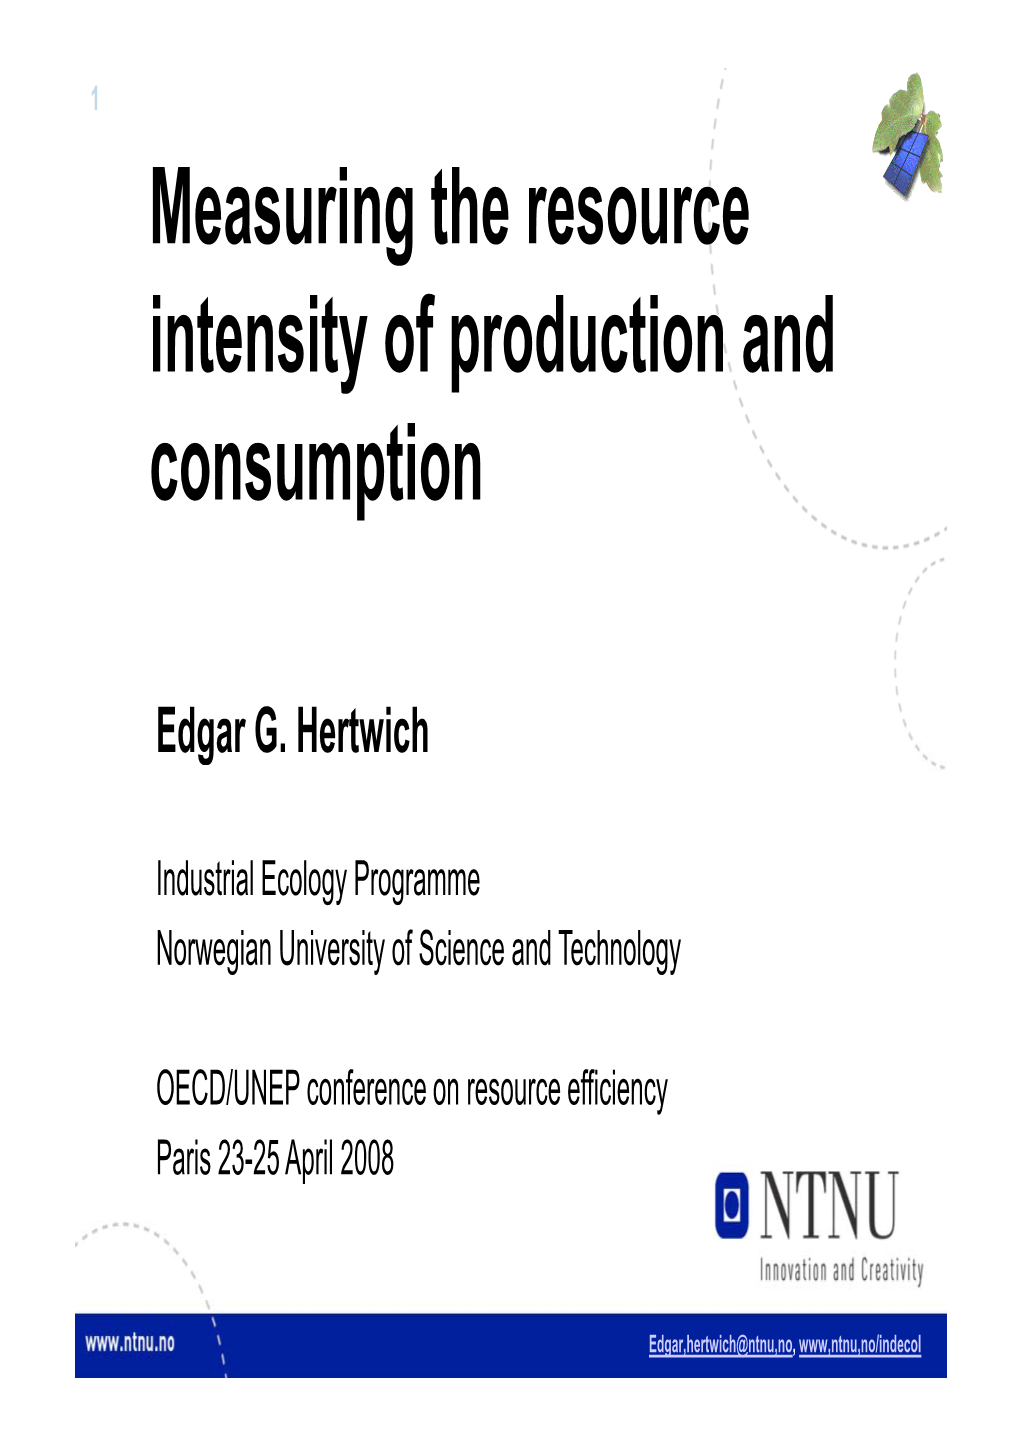 Measuring the Resource Intensity of Production and Consumption